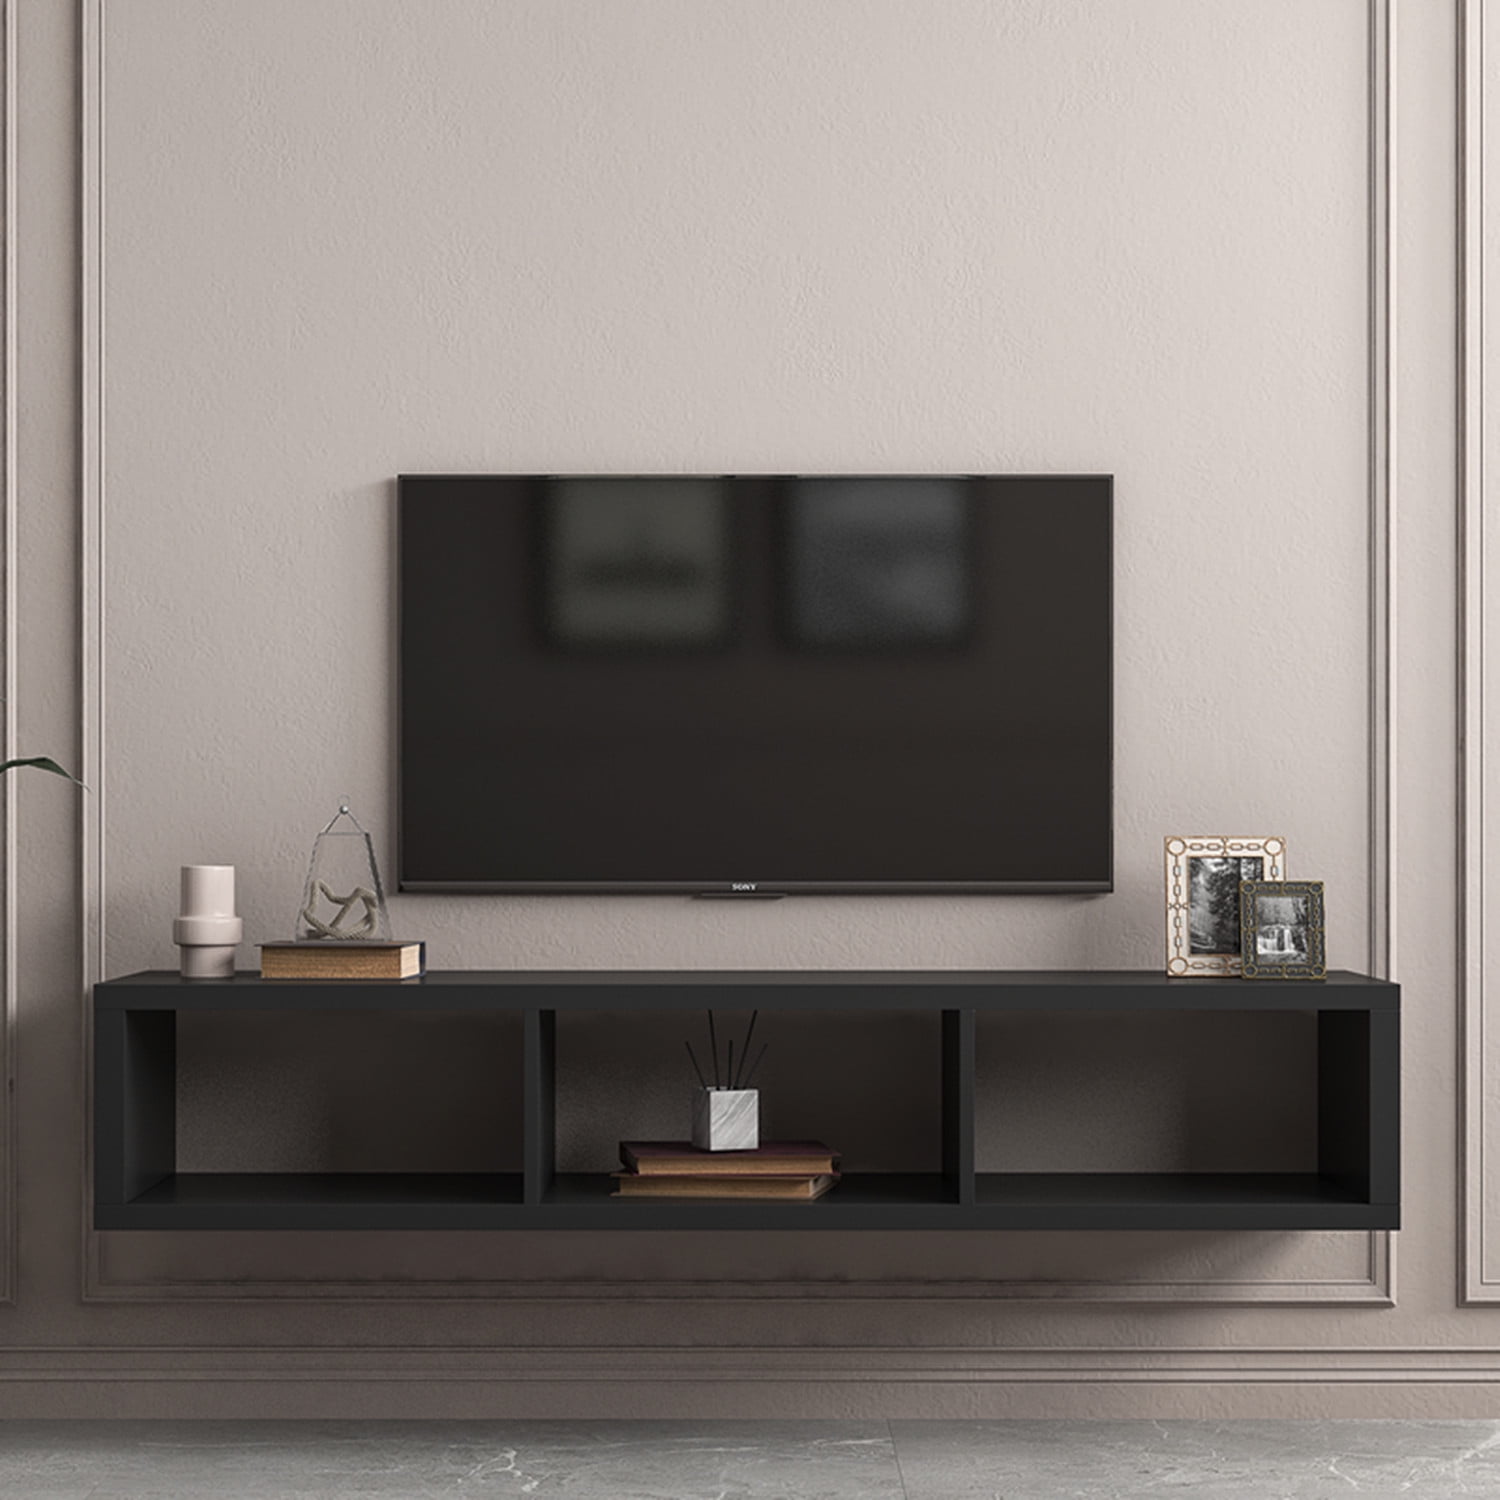 Shallow Floating TV Console, Wall Mounted Floating TV Stand with 3 Open Compartments 60 Entertainment Storage Shelf Media Console Table Modern TV Cabinet for Living Room, Walnut - Walmart.com